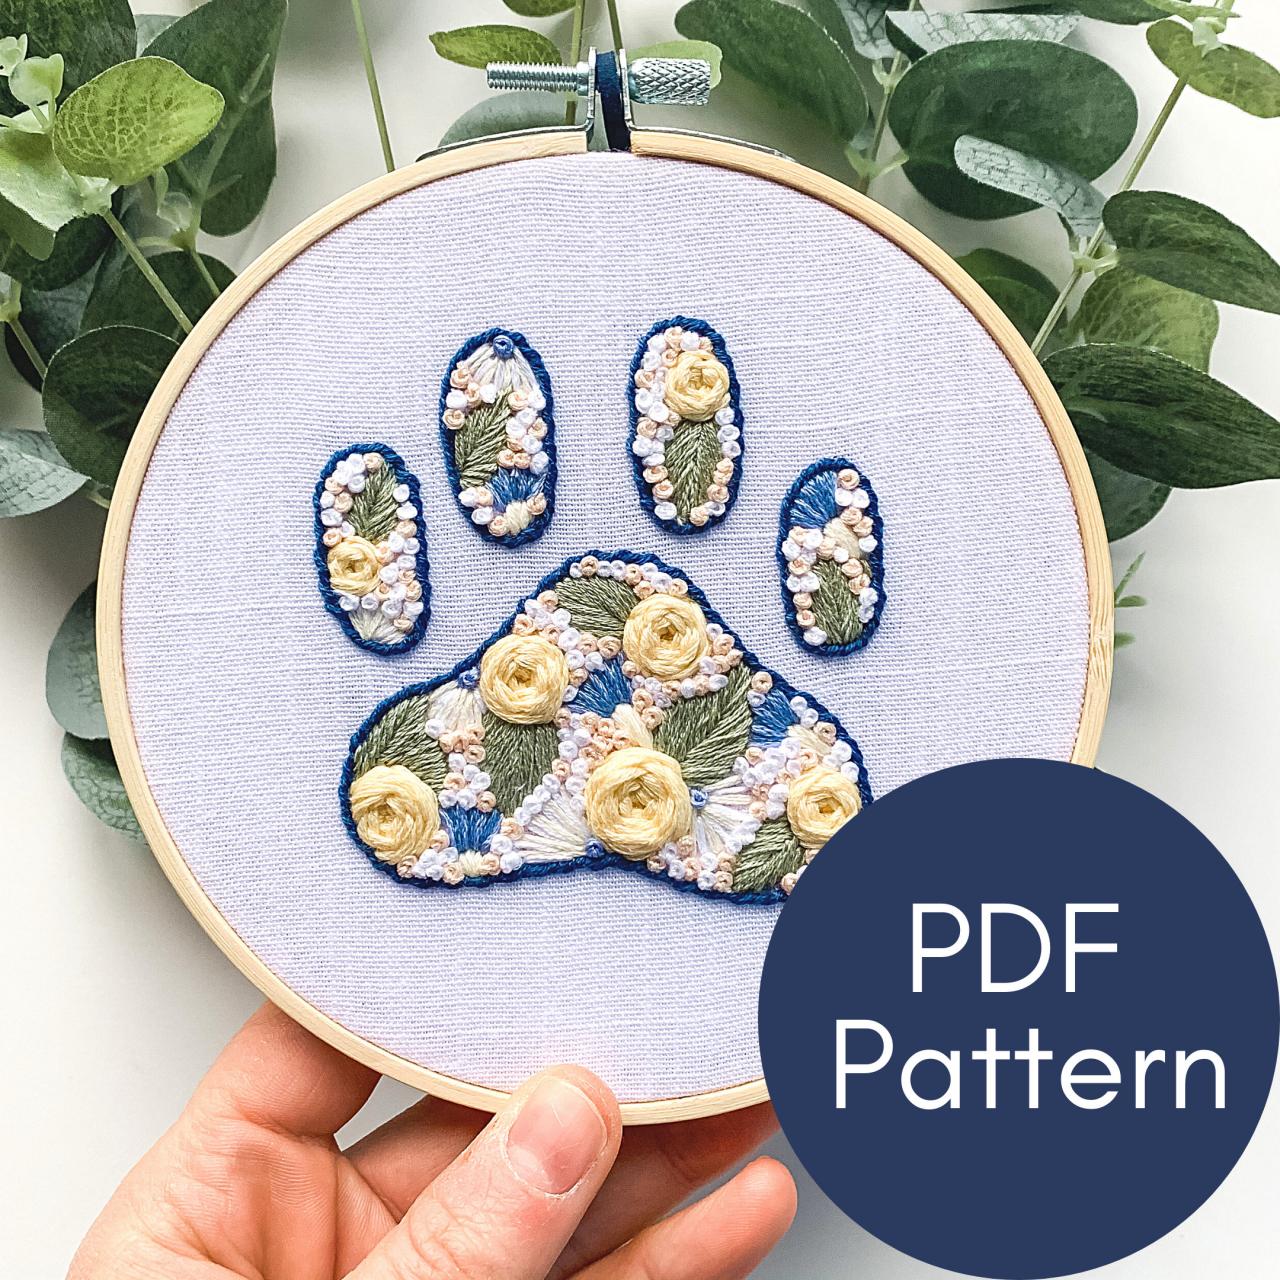 Floral Paw Print Hand Embroidery Pattern | Modern Embroidery | Pet Embroidery | DIY Dog Gift | Dog Lover | Animal Embroidery | Woven Roses